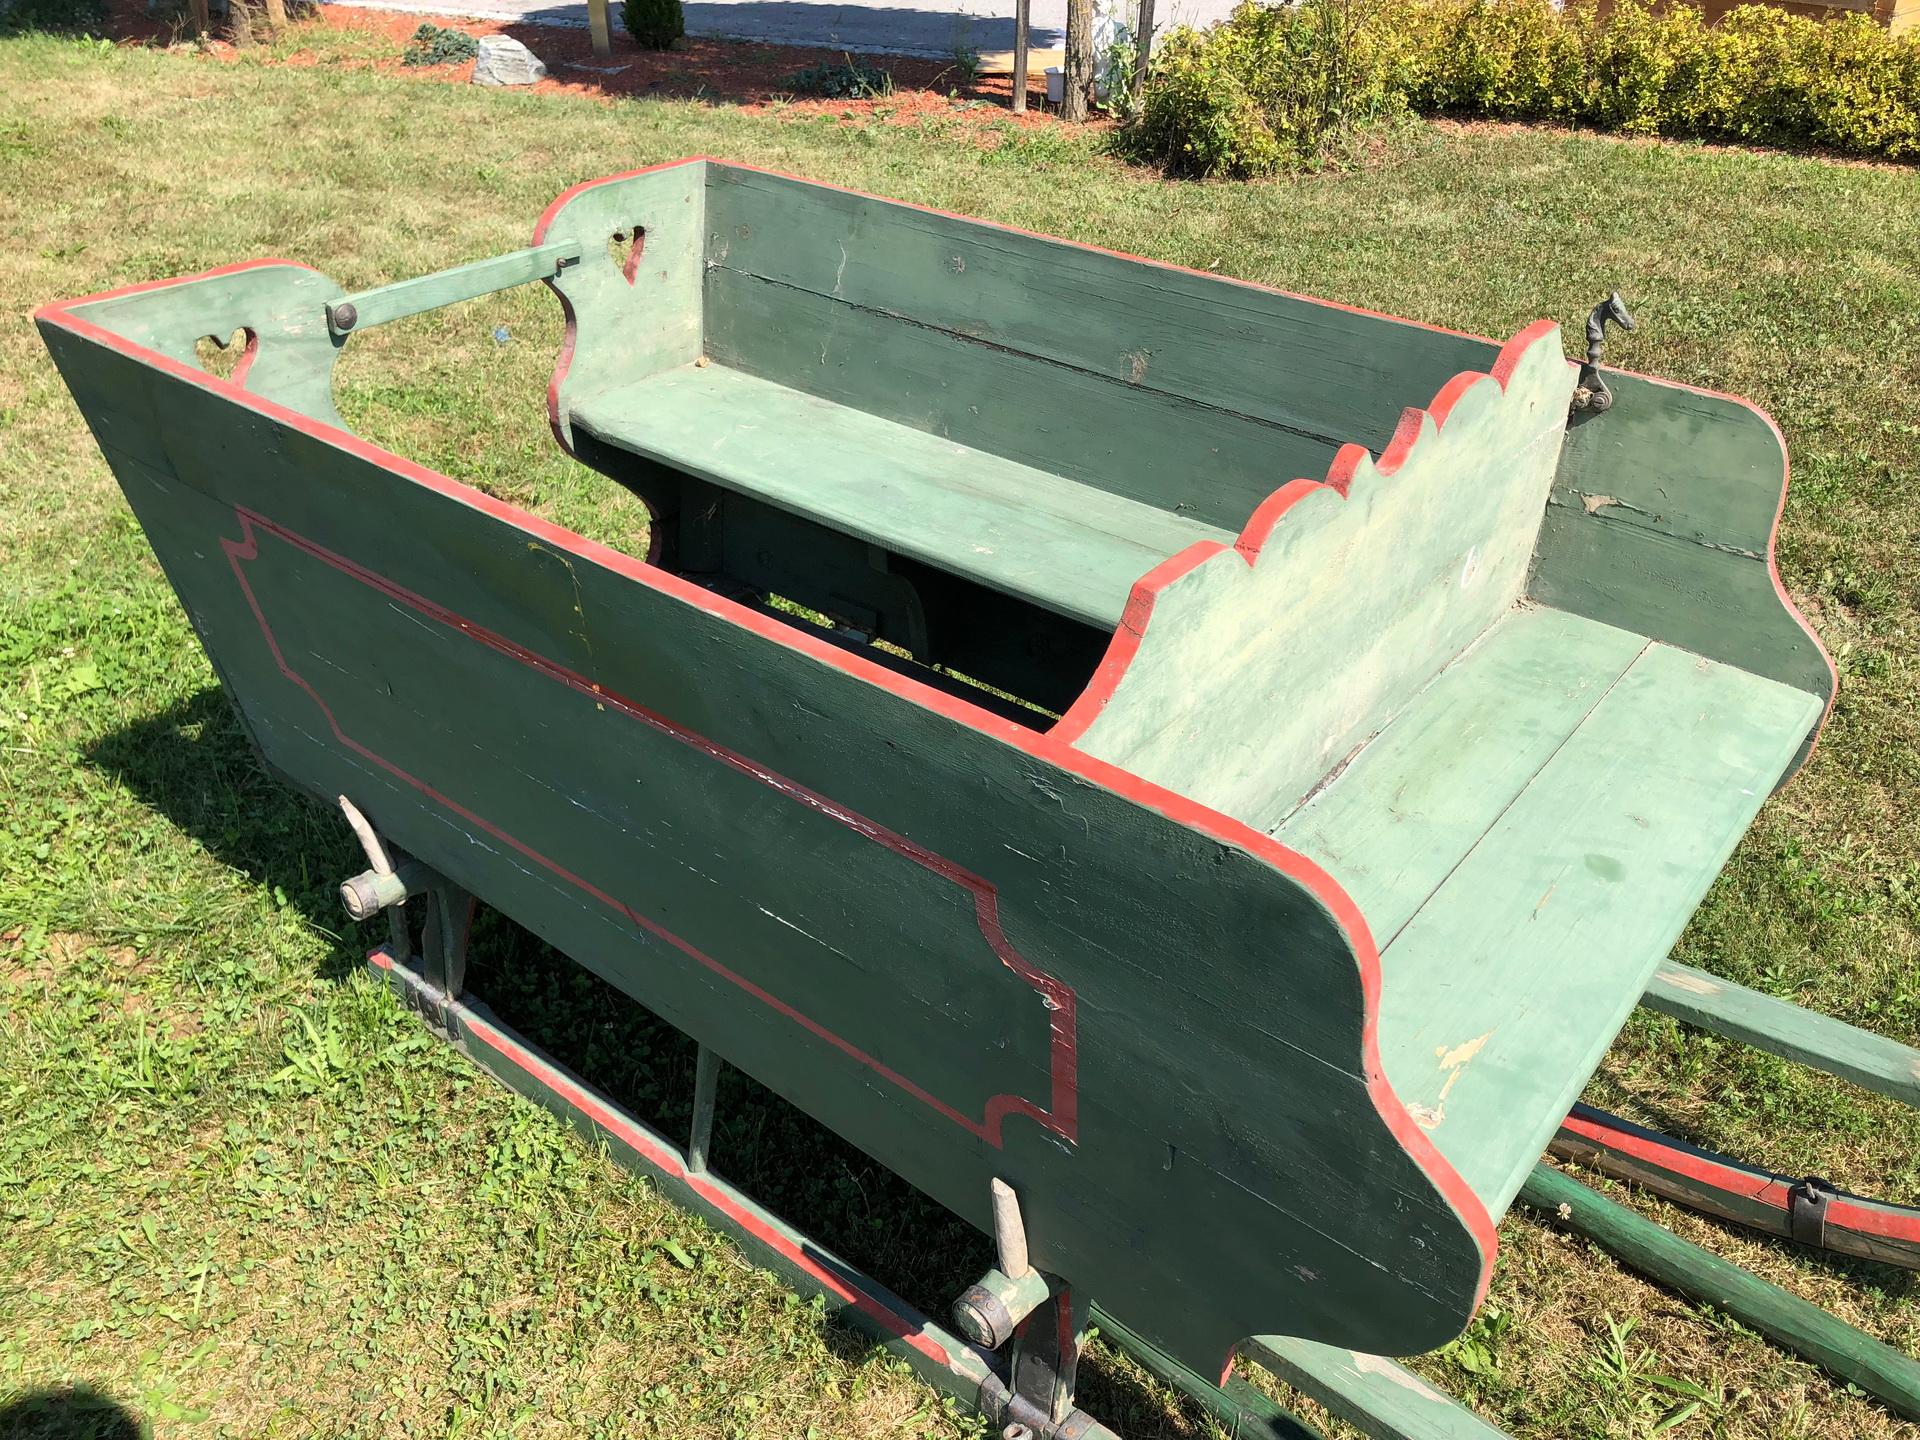 Pretty very well-maintained sleigh from the Salzkammergut in Austria, build circa 1920.

This is an old Salzburg sledge made of wood, very good condition, metal fittings.

It is very well preserved and can still be used for its original